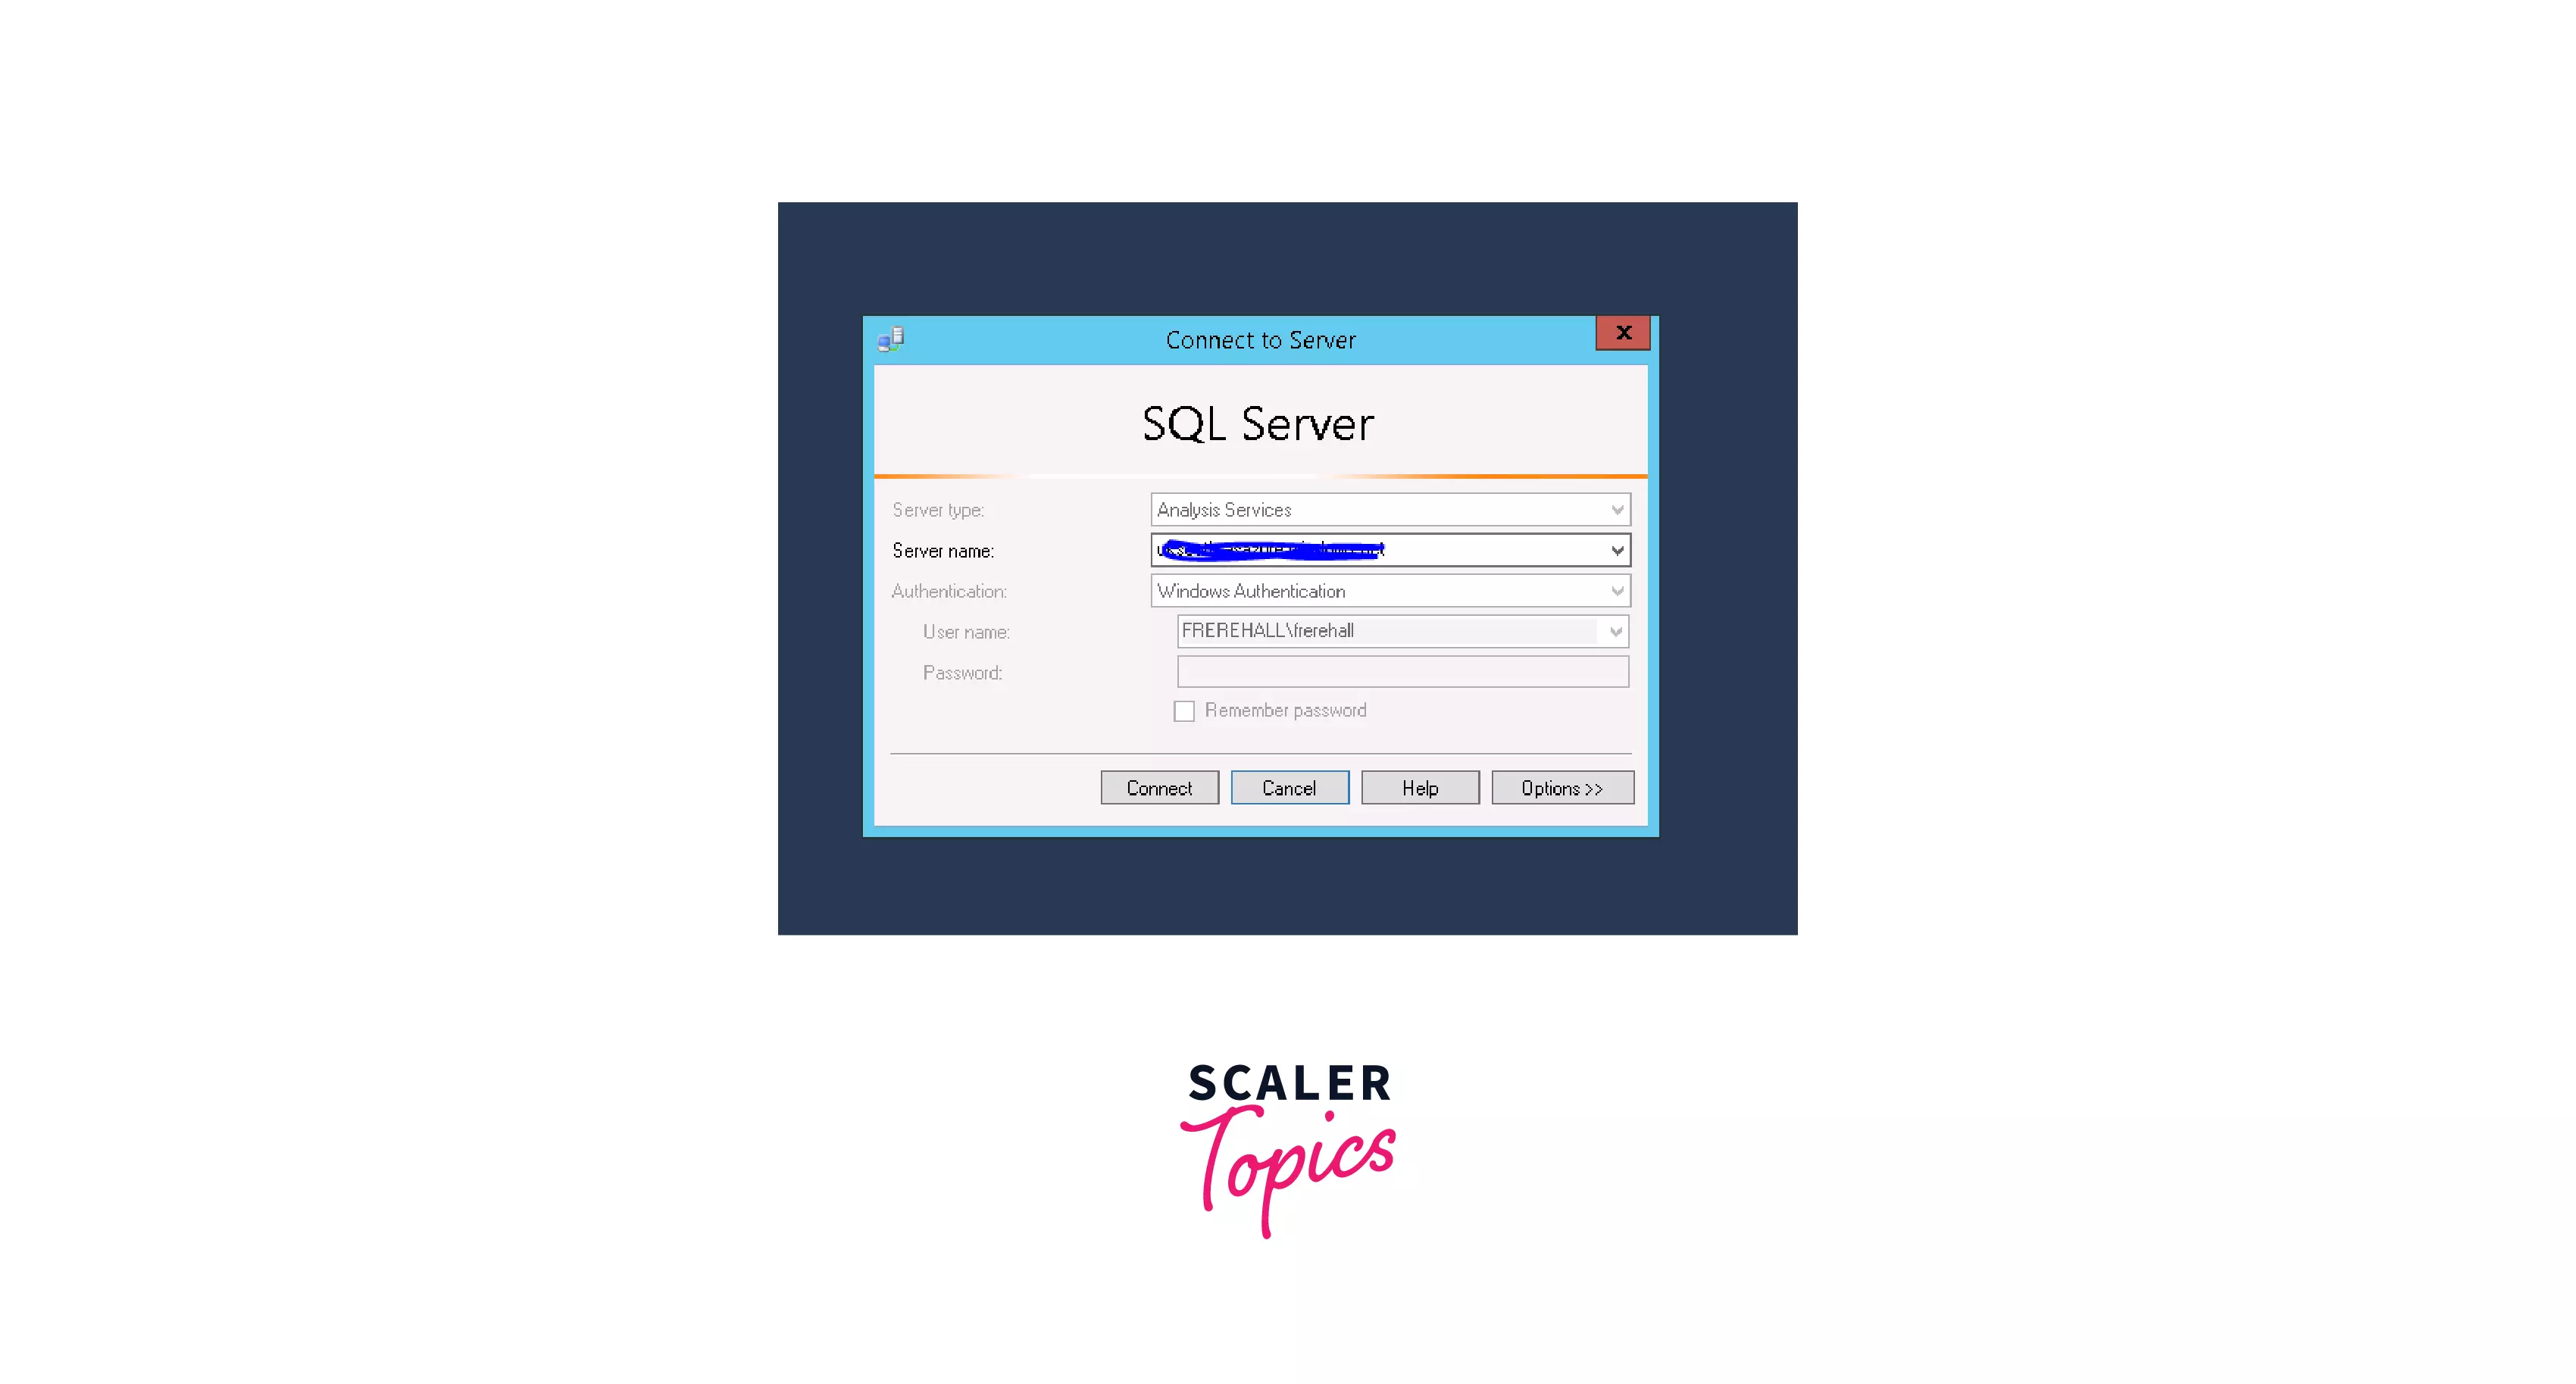 another example of SQL Server Services